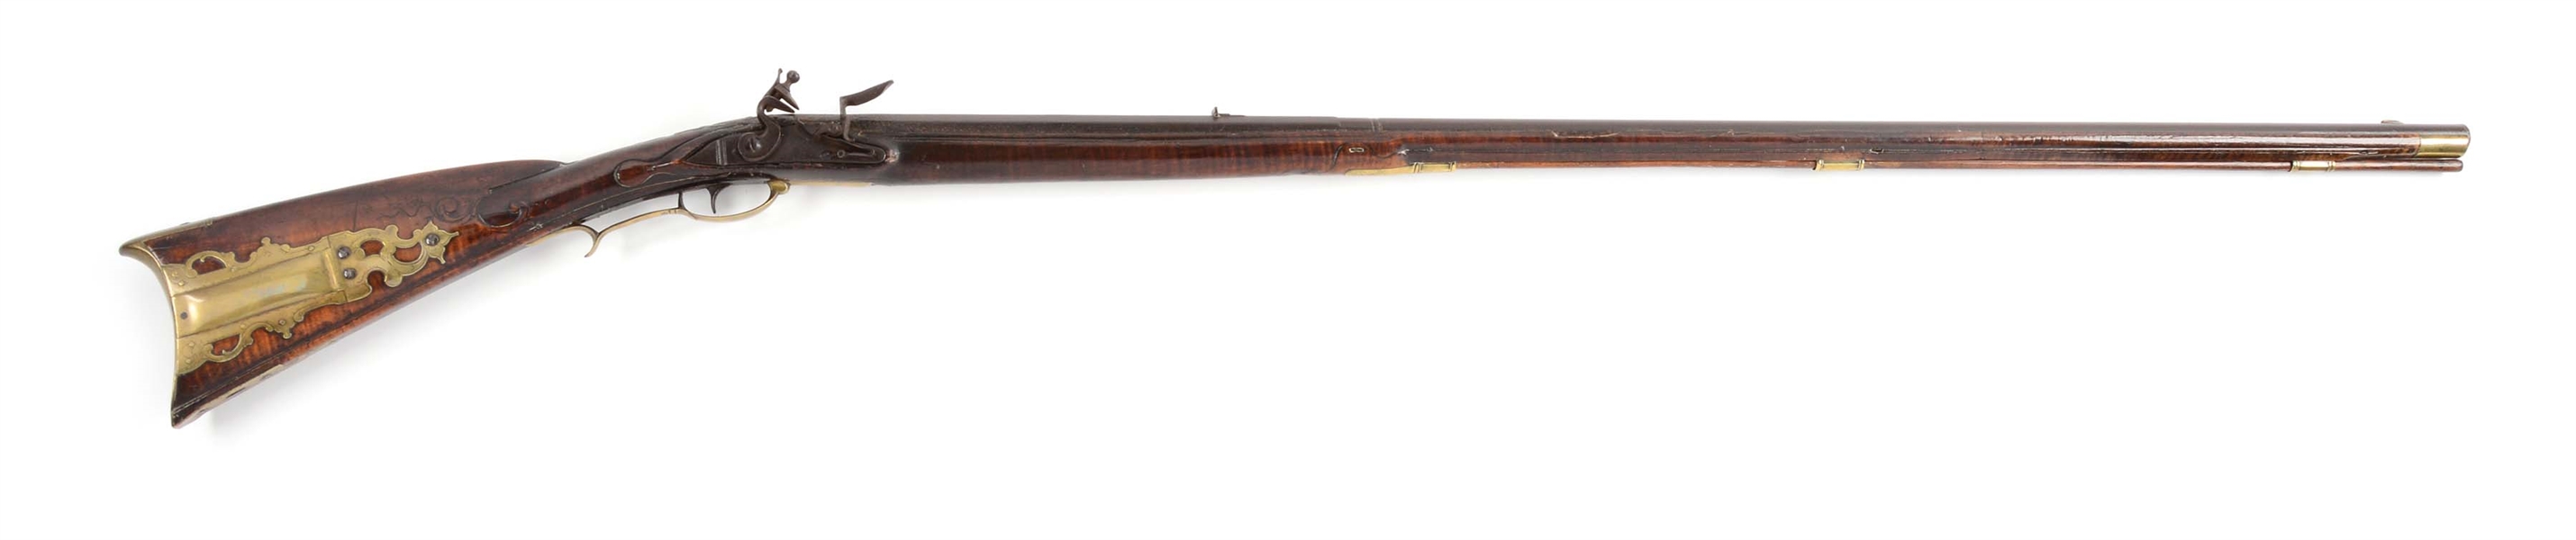 (A) FINE RELIEF CARVED FLINTLOCK KENTUCKY RIFLE SIGNED BY PETER BERRY.